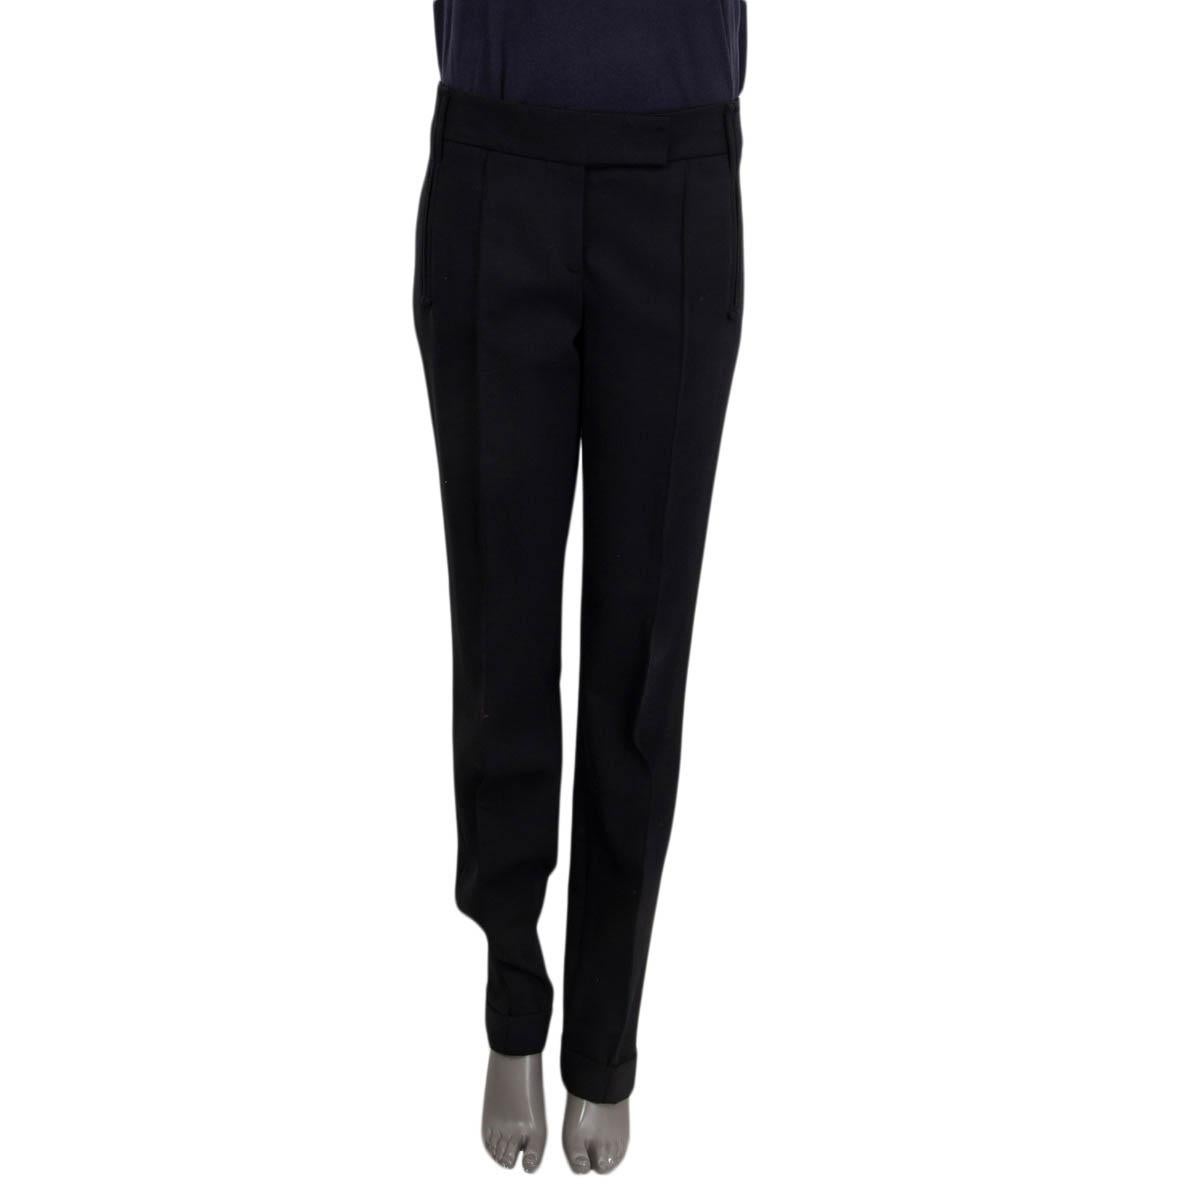 100% authentic Salvatore Ferragamo suit pants in black wool (94%), elastane (5%) and nylon (1%). Features belt loops, two faux slit pockets on the front and two faux slit pockets on the back. Opens with a concealed hook, button and zipper on the